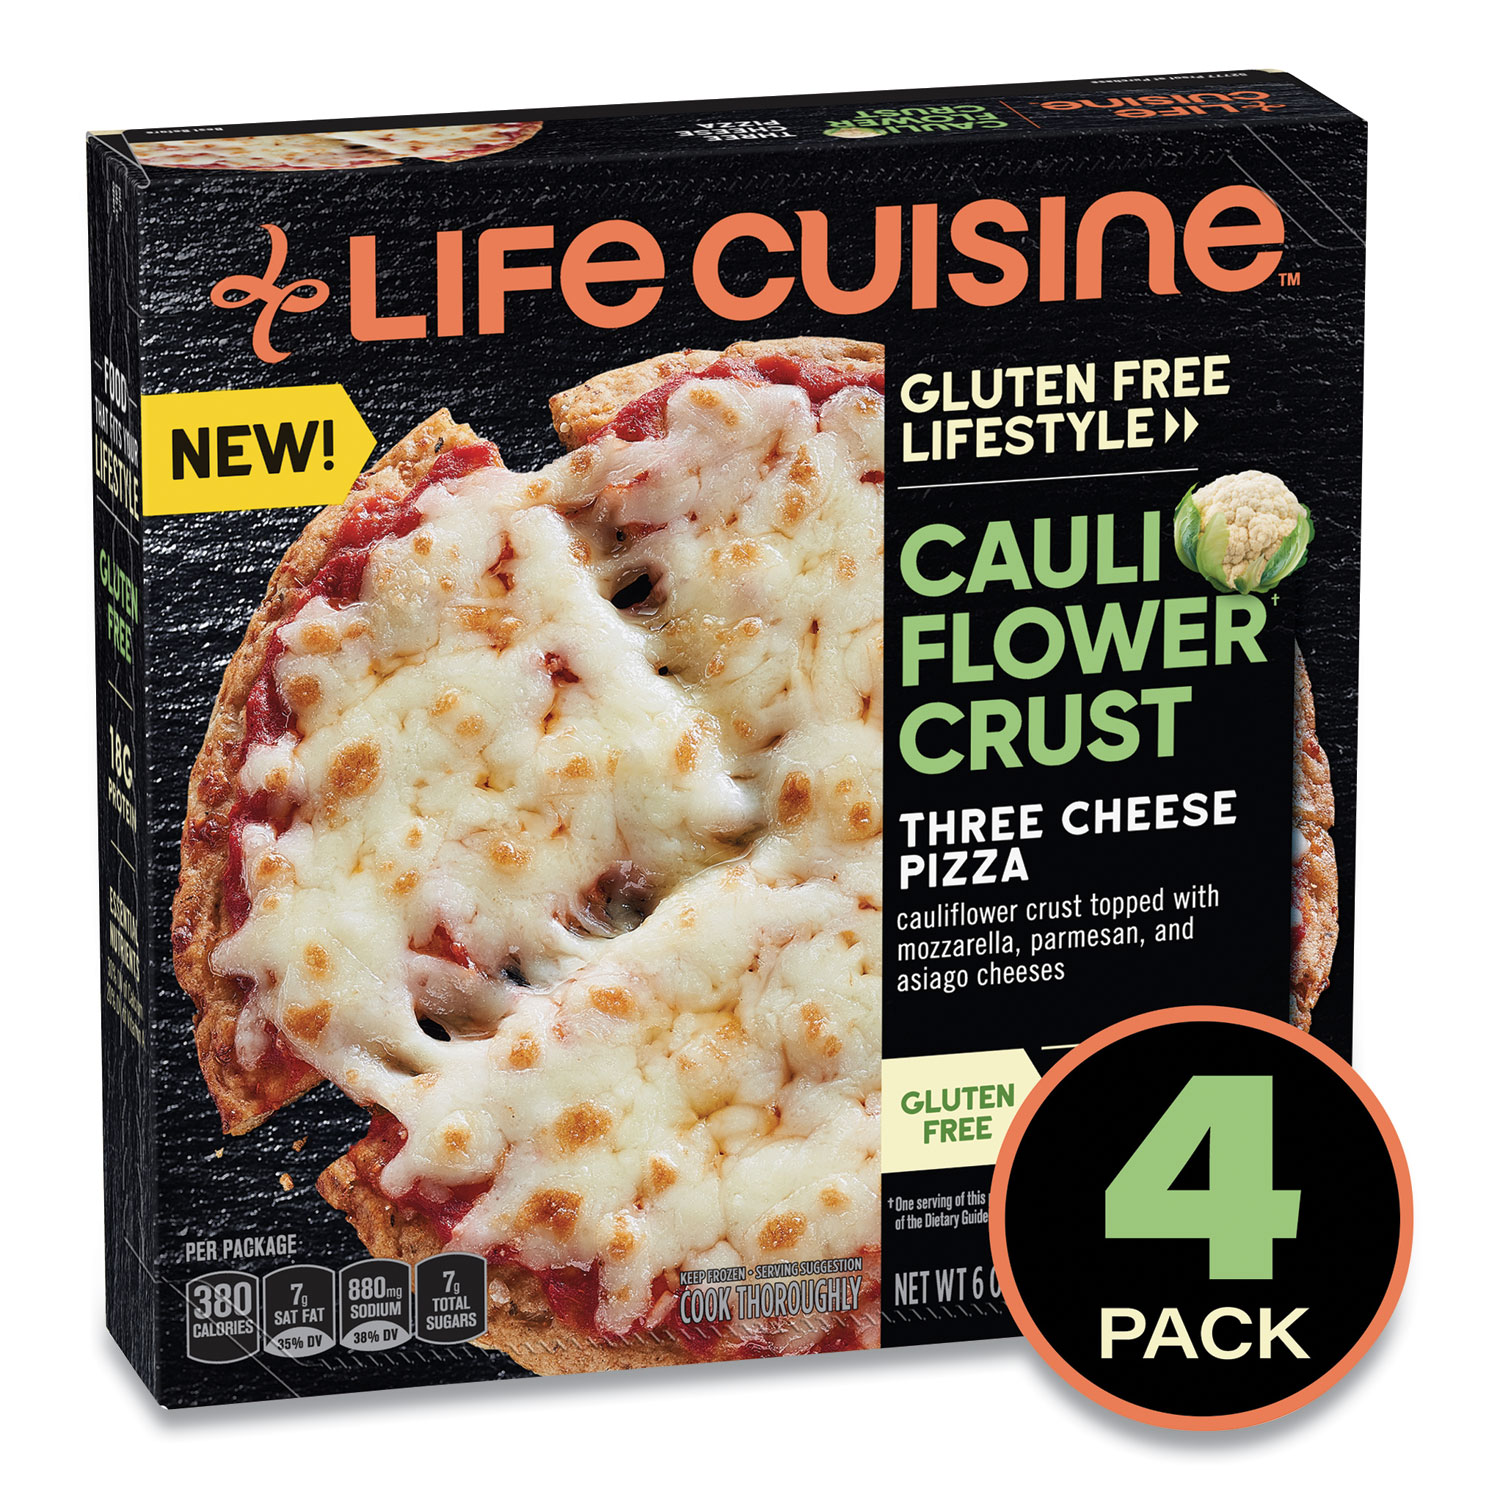  Life Cuisine 12437901 Gluten Free Lifestyle Cauliflower Crust Three Cheese Pizza, 6 oz, 4/Pack, Free Delivery in 1-4 Business Days (GRR90300203) 